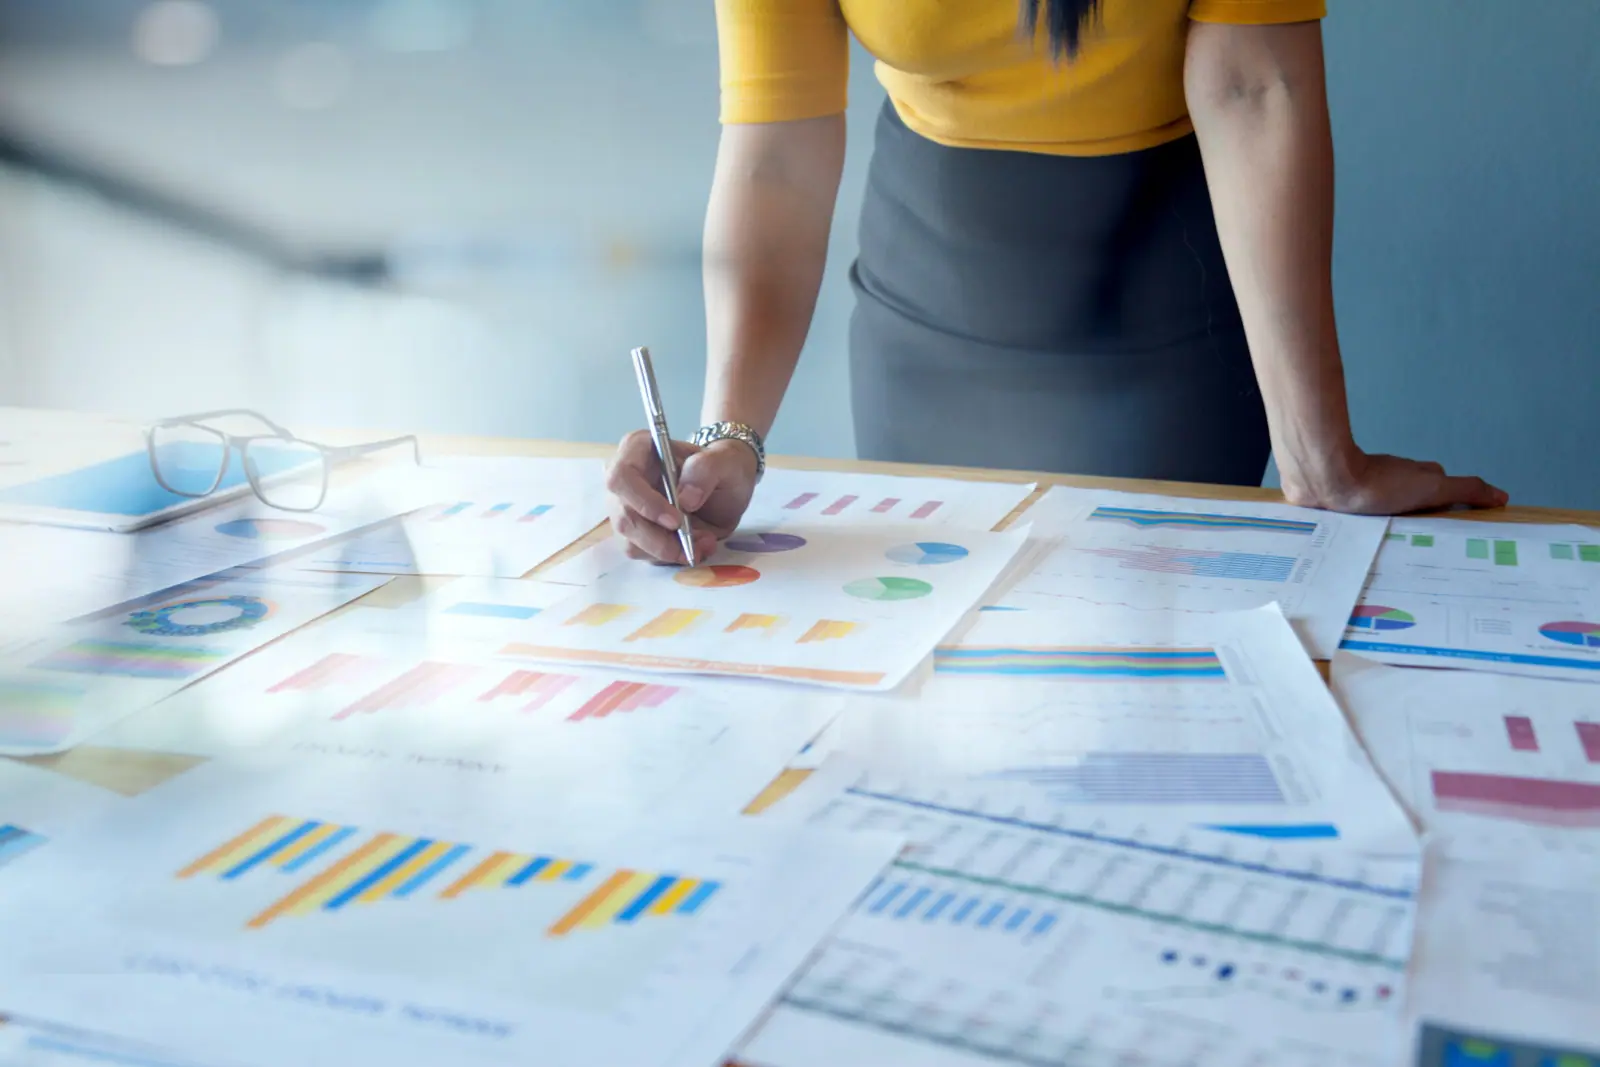 Use Business Metrics to Inform Your Recruiting Strategy